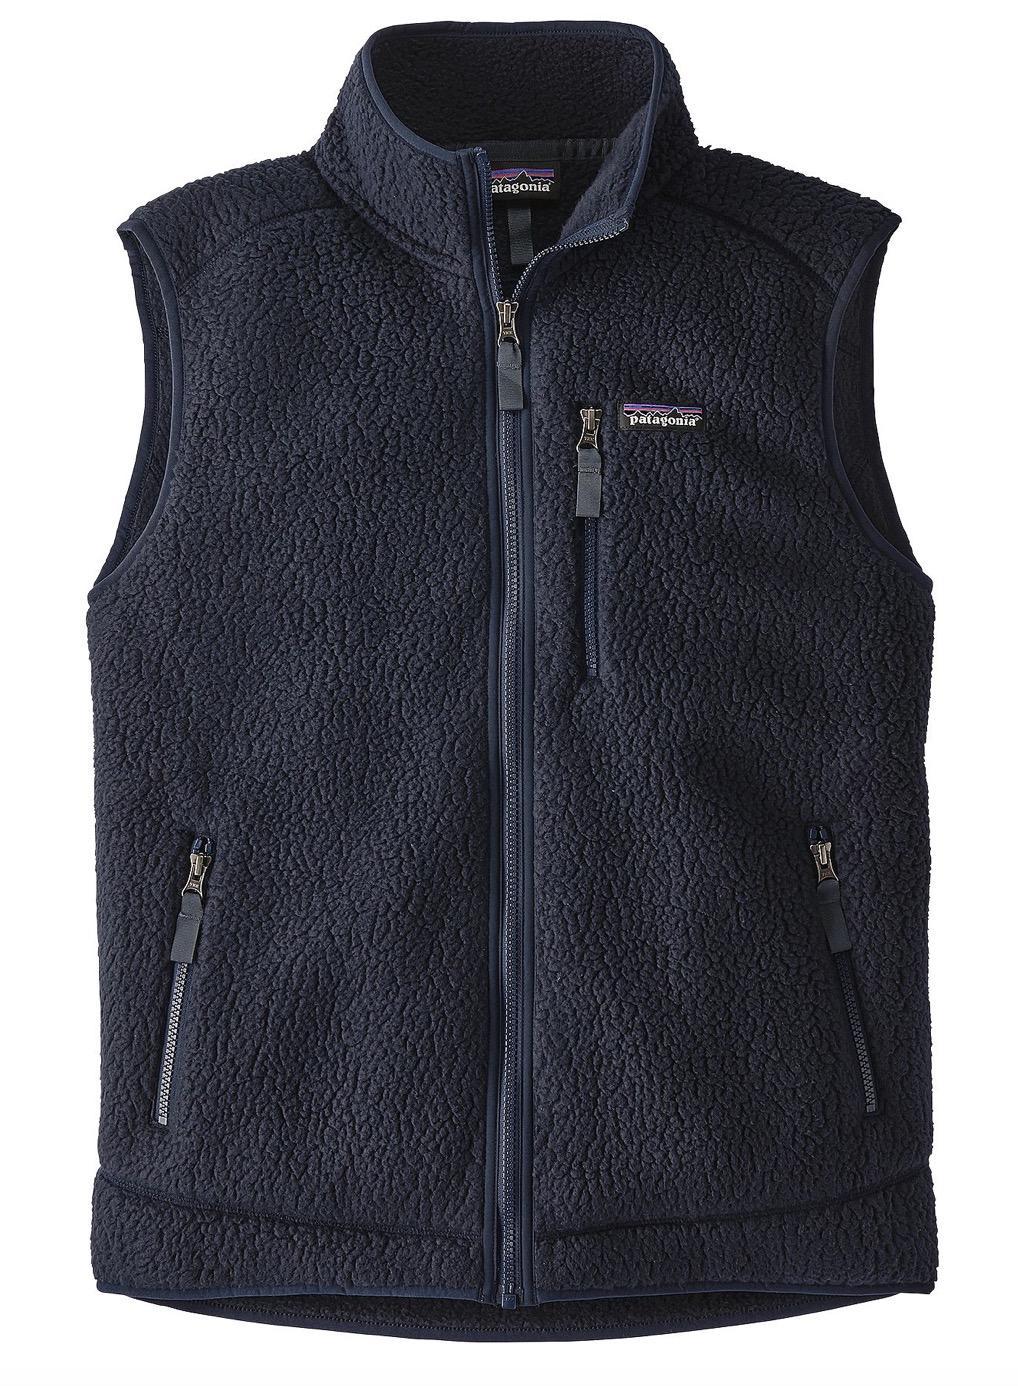 For the Dudes Patagonia Nano Puff Jacket Price: $199.00 $169.